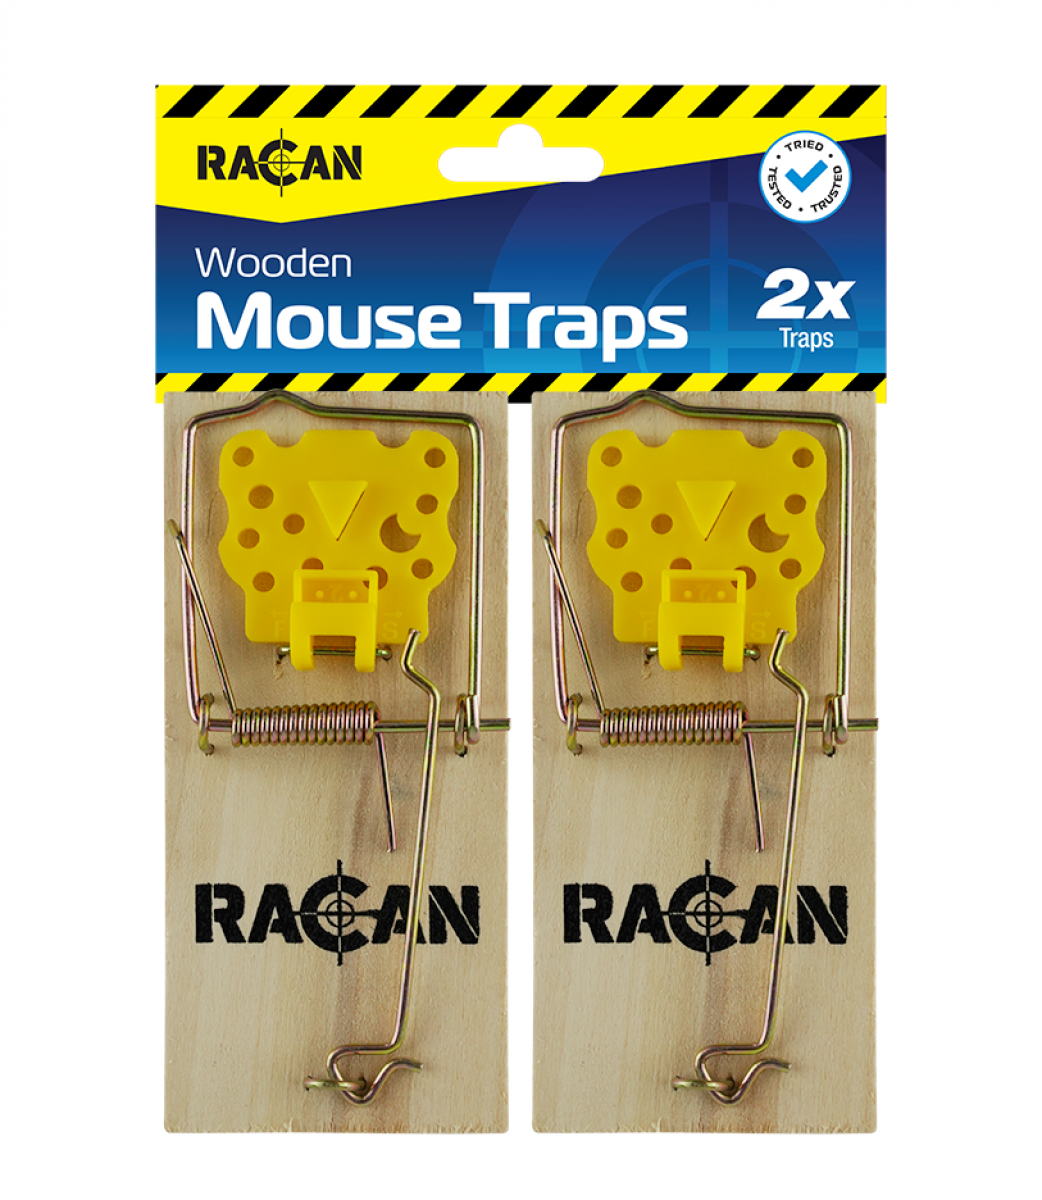 Racan Wooden Mouse Traps